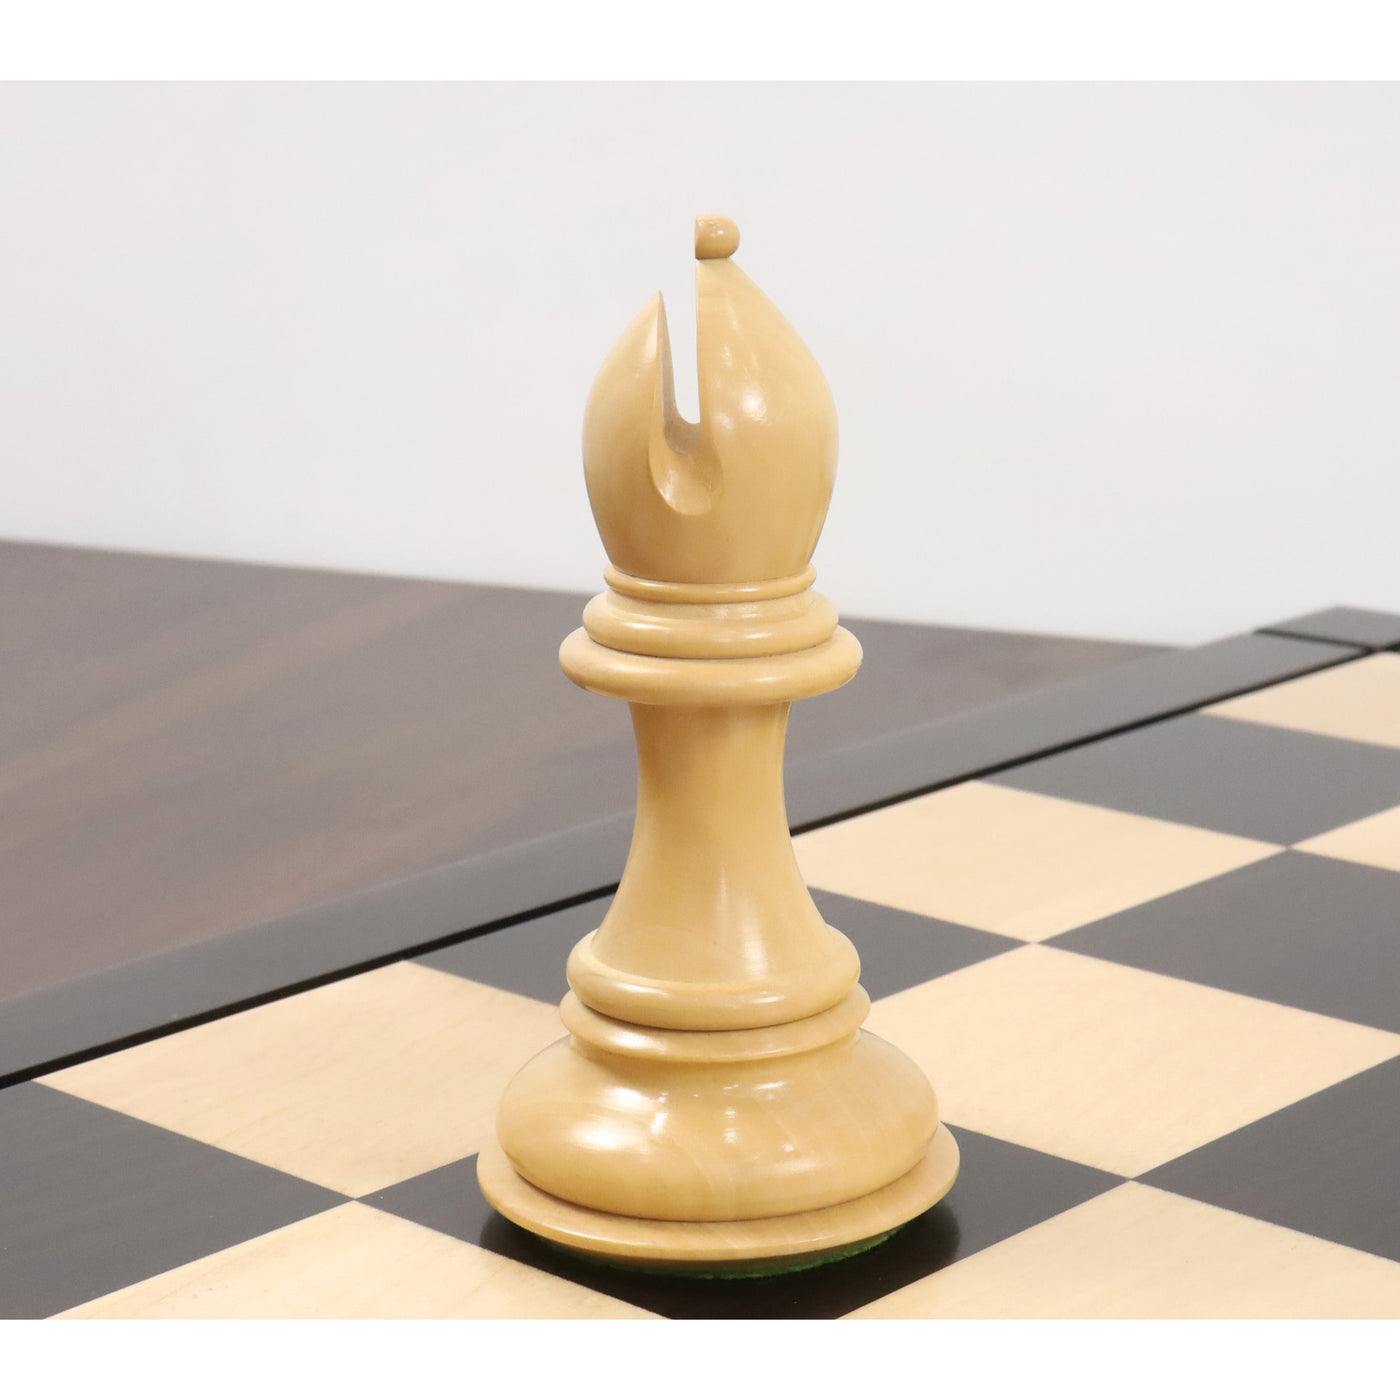 6.1" Mammoth Luxury Staunton Chess Set - Chess Pieces Only - Ebony Wood - Triple Weight